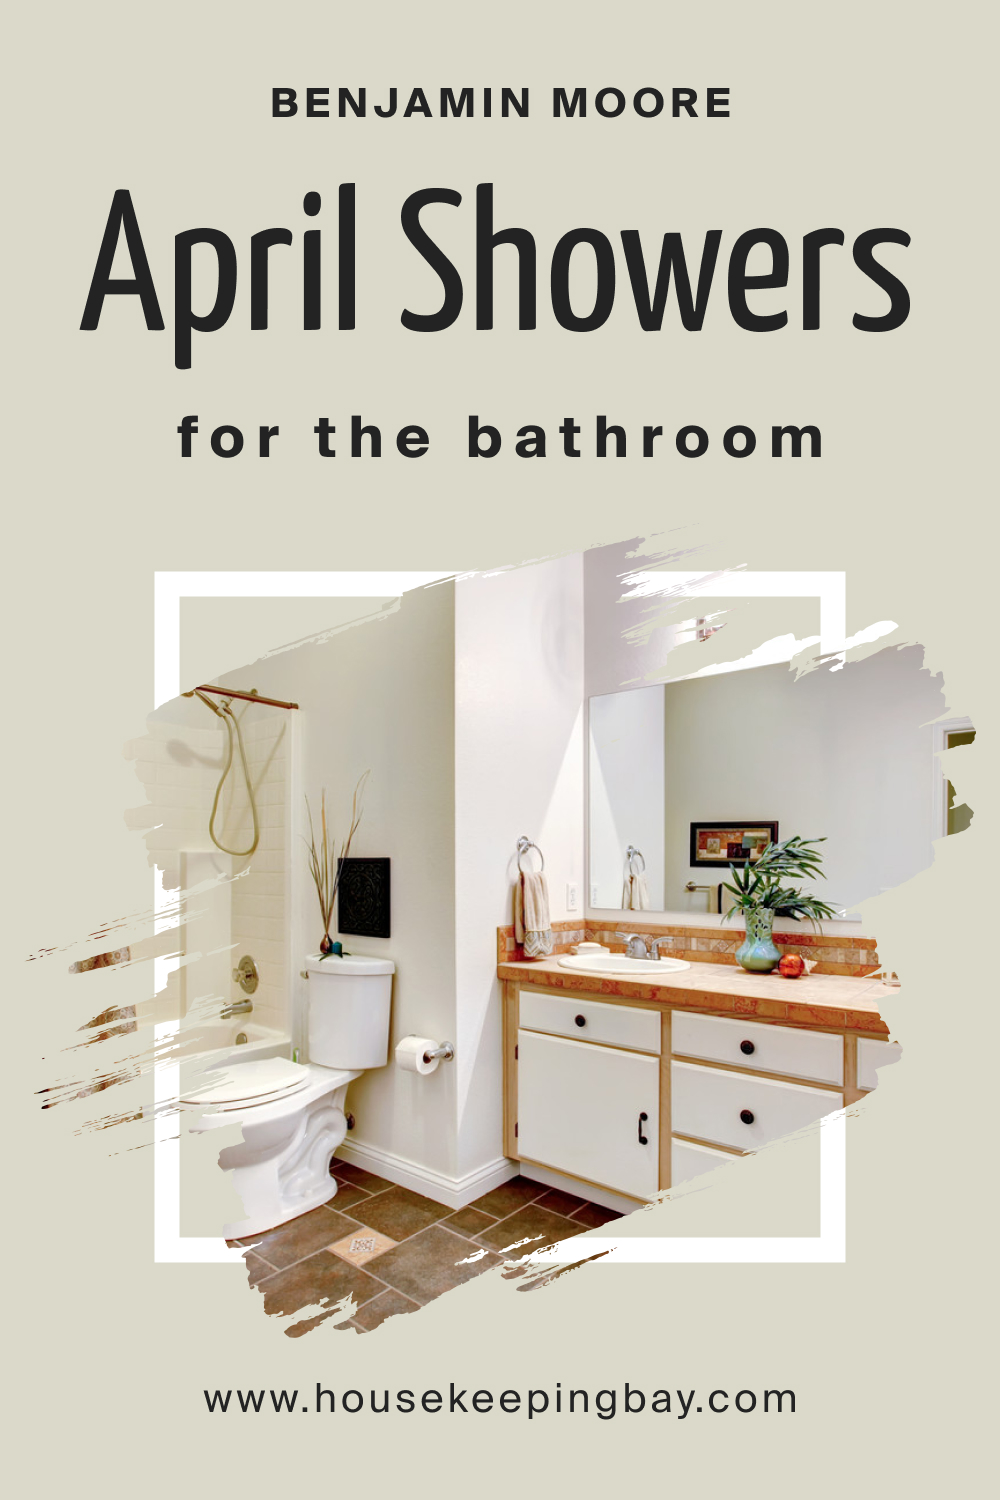 How to Use BM April Showers 1507 in the Bathroom?